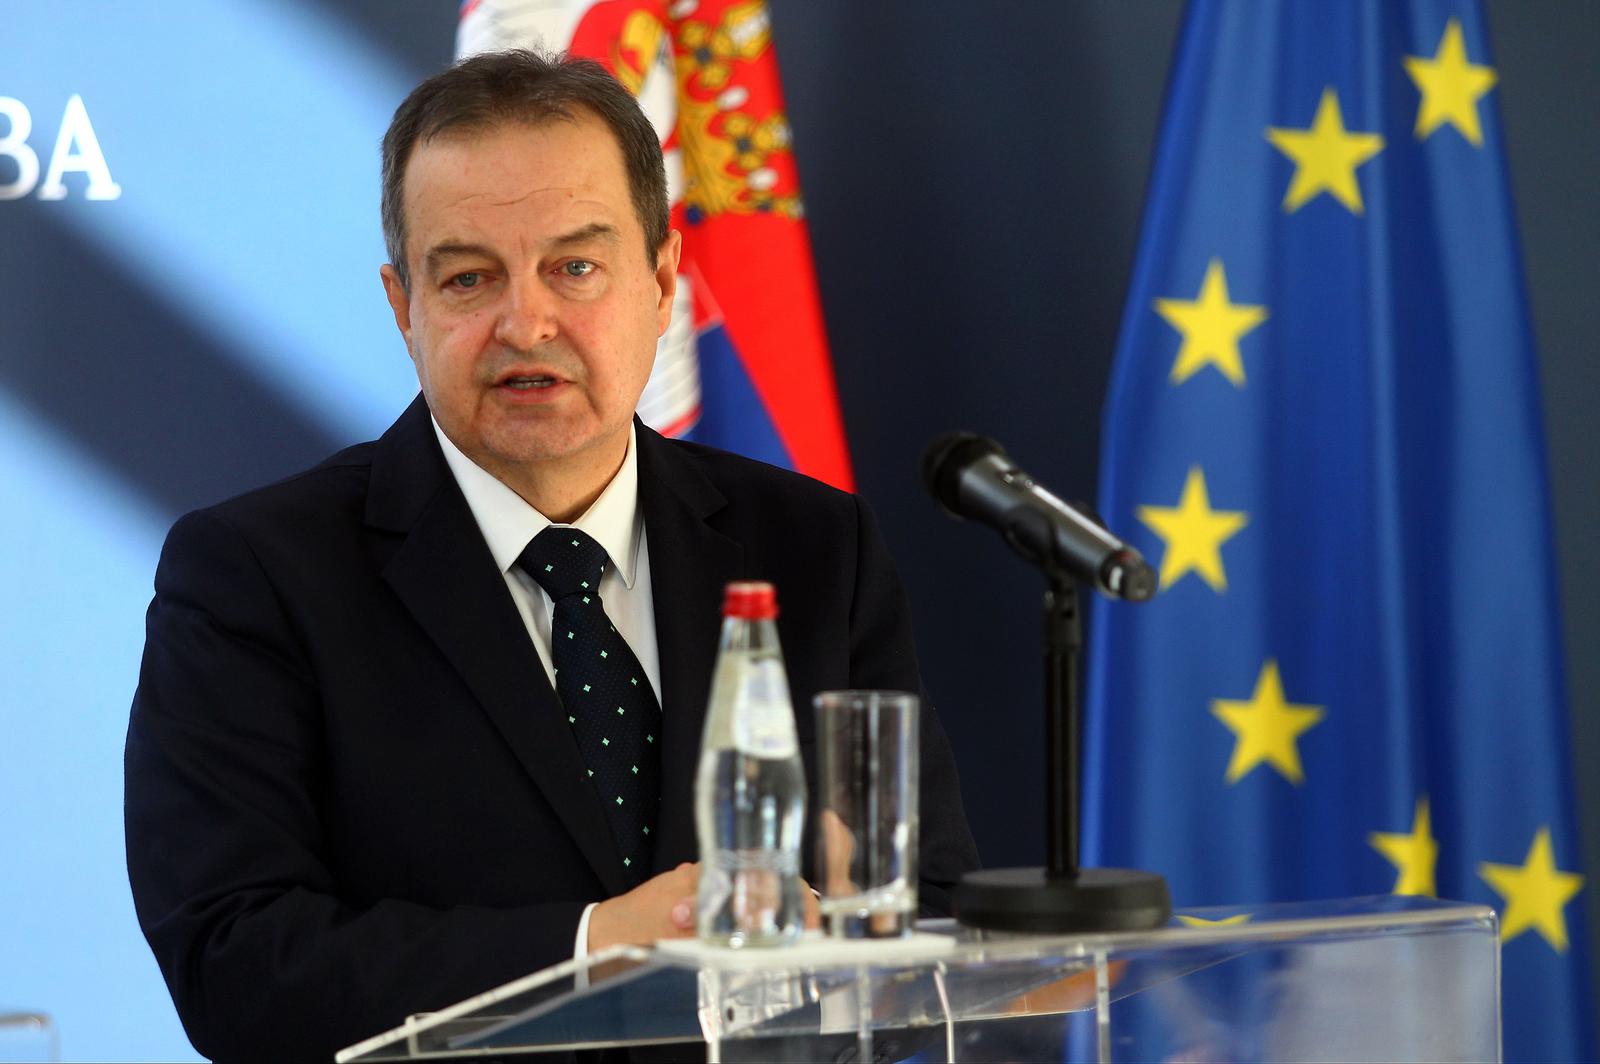 13, April, 2023, Belgrade - The Minister of Foreign Affairs of the Republic of Serbia, Ivica Dacic, met with the Minister of Foreign Affairs of Spain, Jose Manuel Albares. Ivica Dacic. Photo: A.K./ATAImages

13, april, 2023, Beograd - Ministar spoljnih poslova Republike Srbije Ivica Dacic se sastao sa ministrom spoljnih poslova Spanije, Hose Manuelom Albaresom. Photo: A.K./ATAImages Photo: A.K./ATAImages/PIXSELL